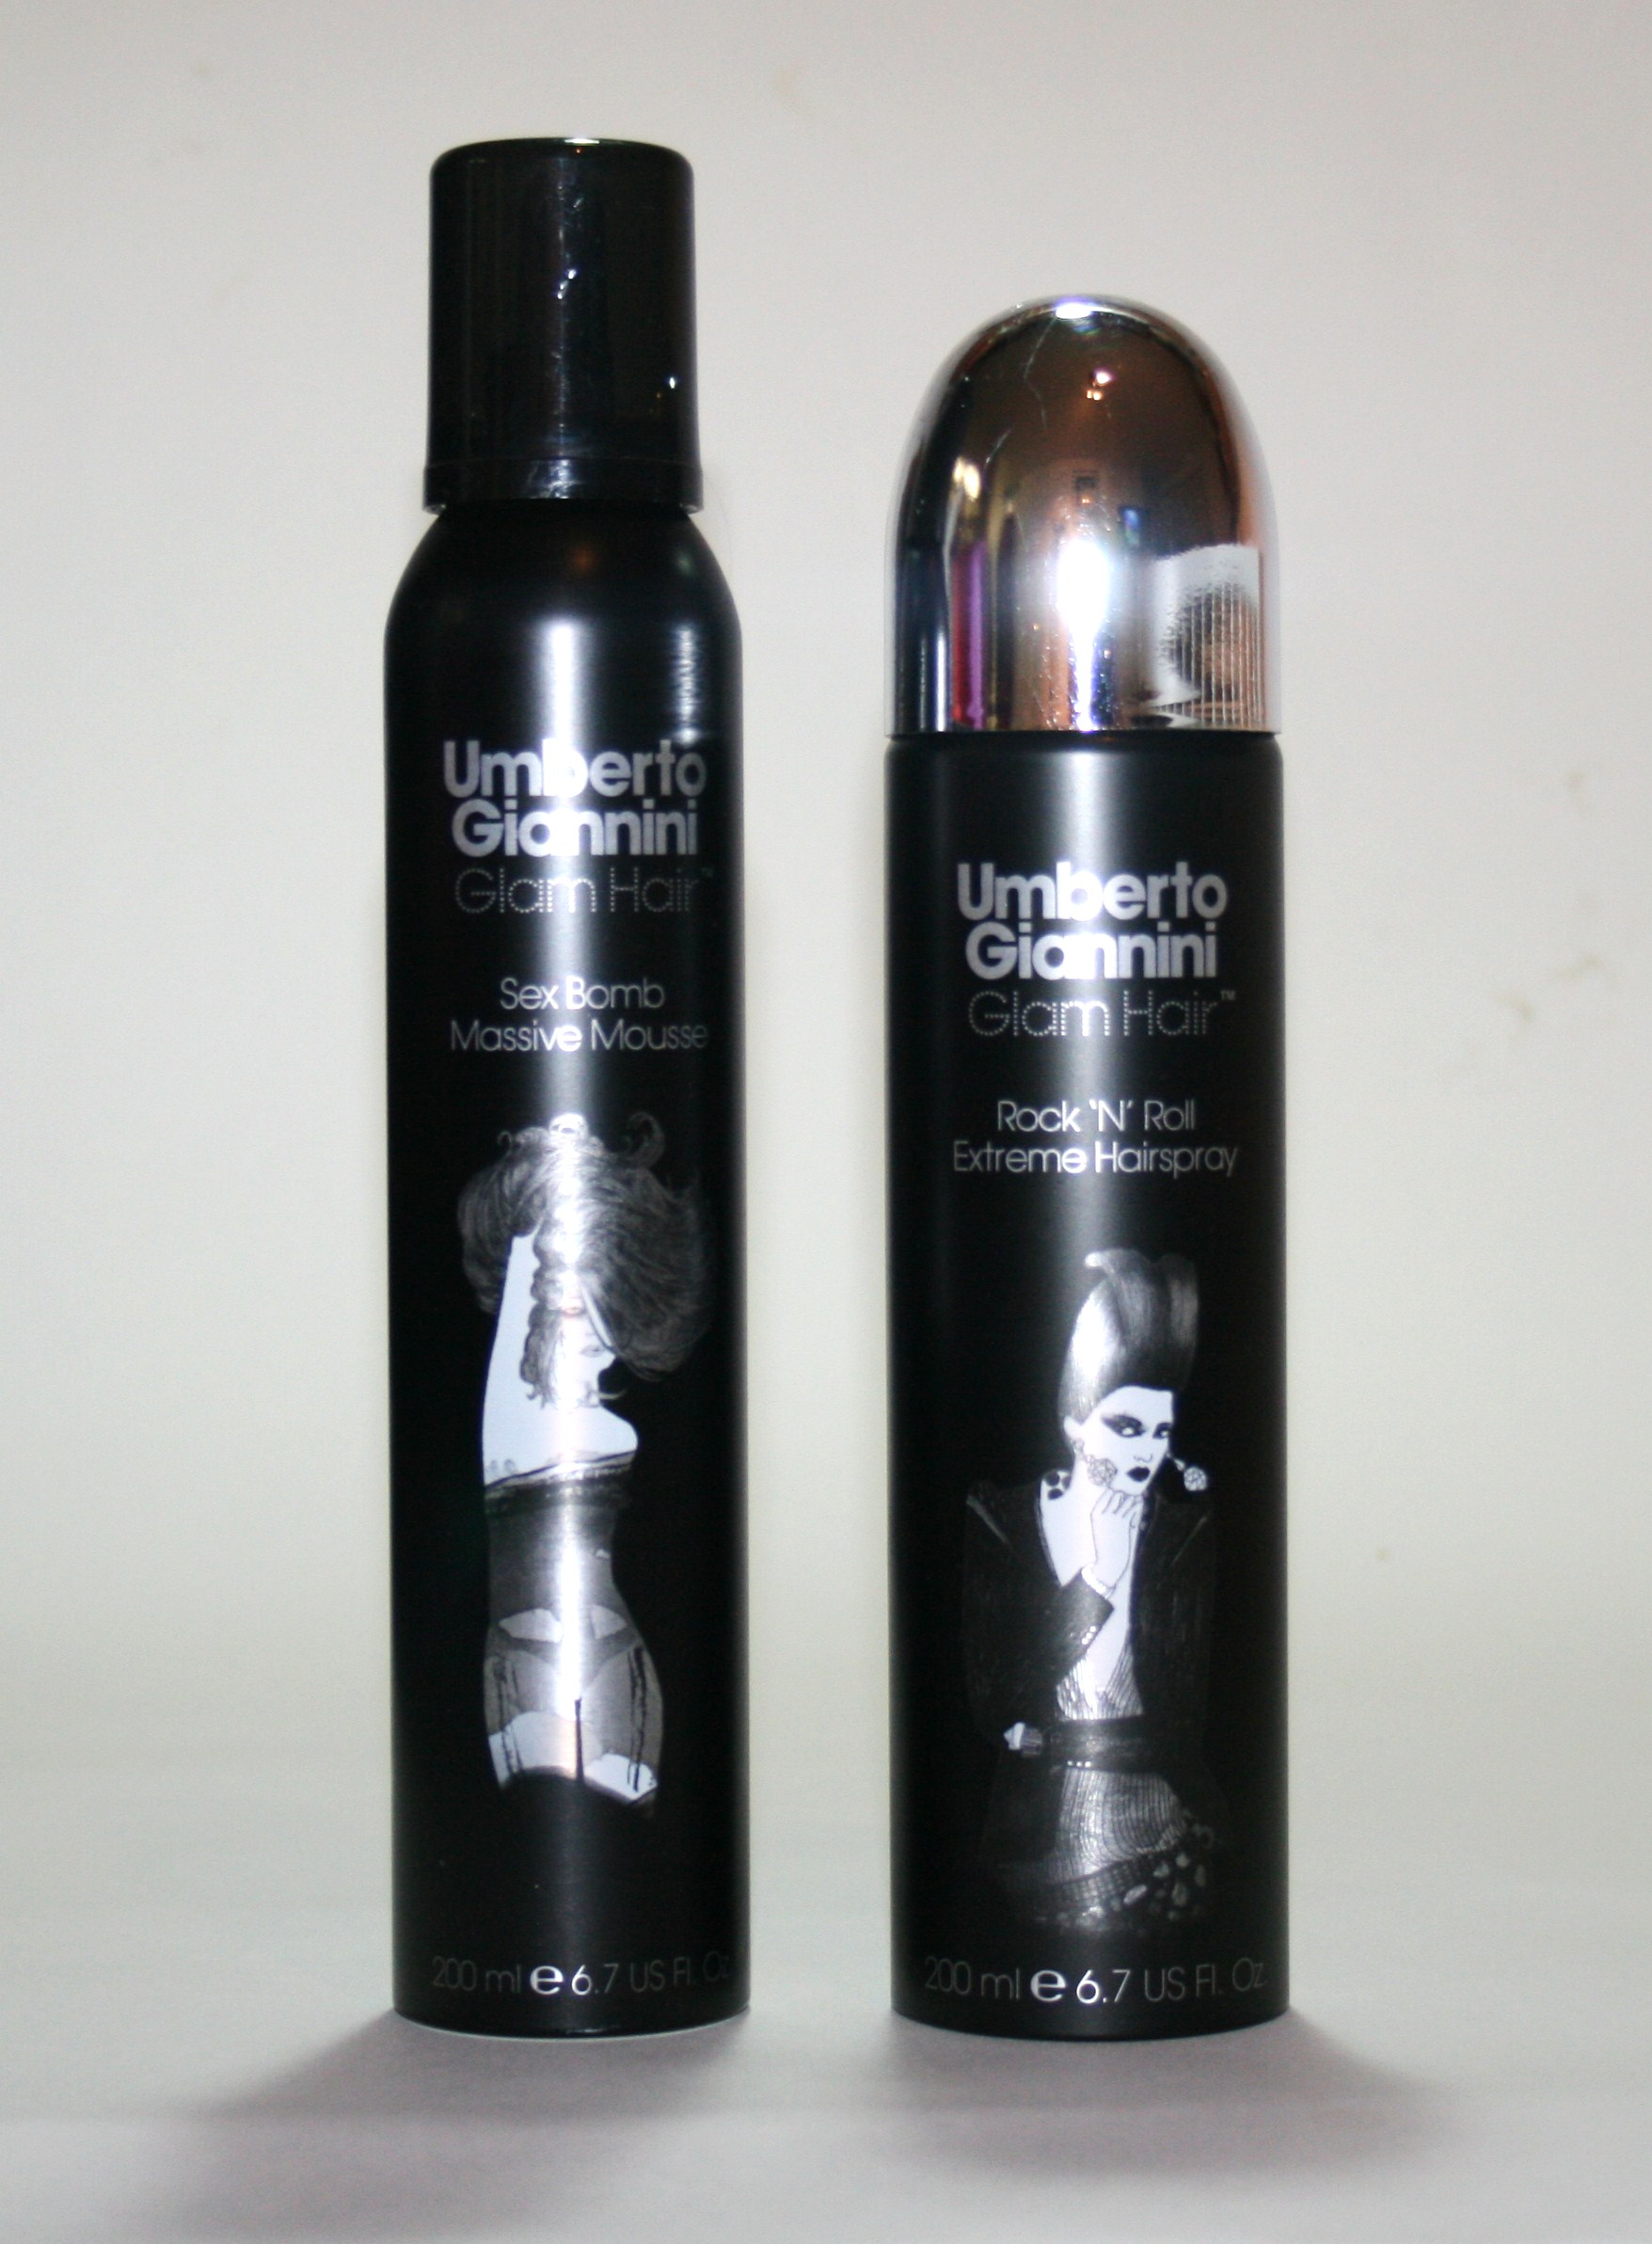 Umberto Giannini Glam Hair Massive Mousse and Rock ‘n’ Roll Extreme Hairspray